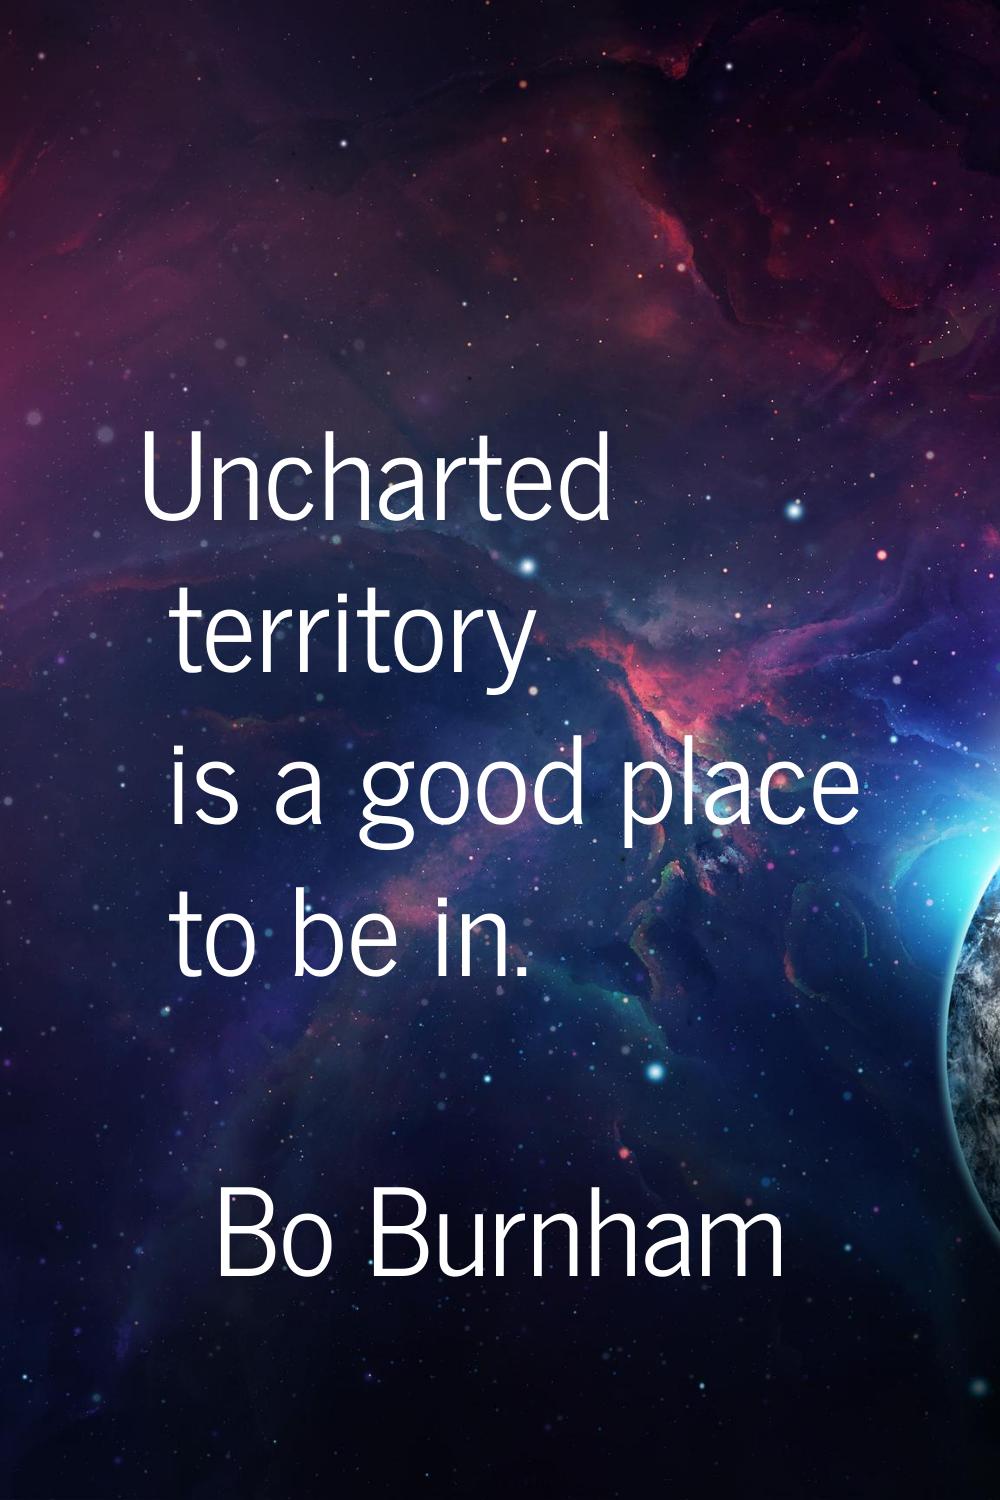 Uncharted territory is a good place to be in.